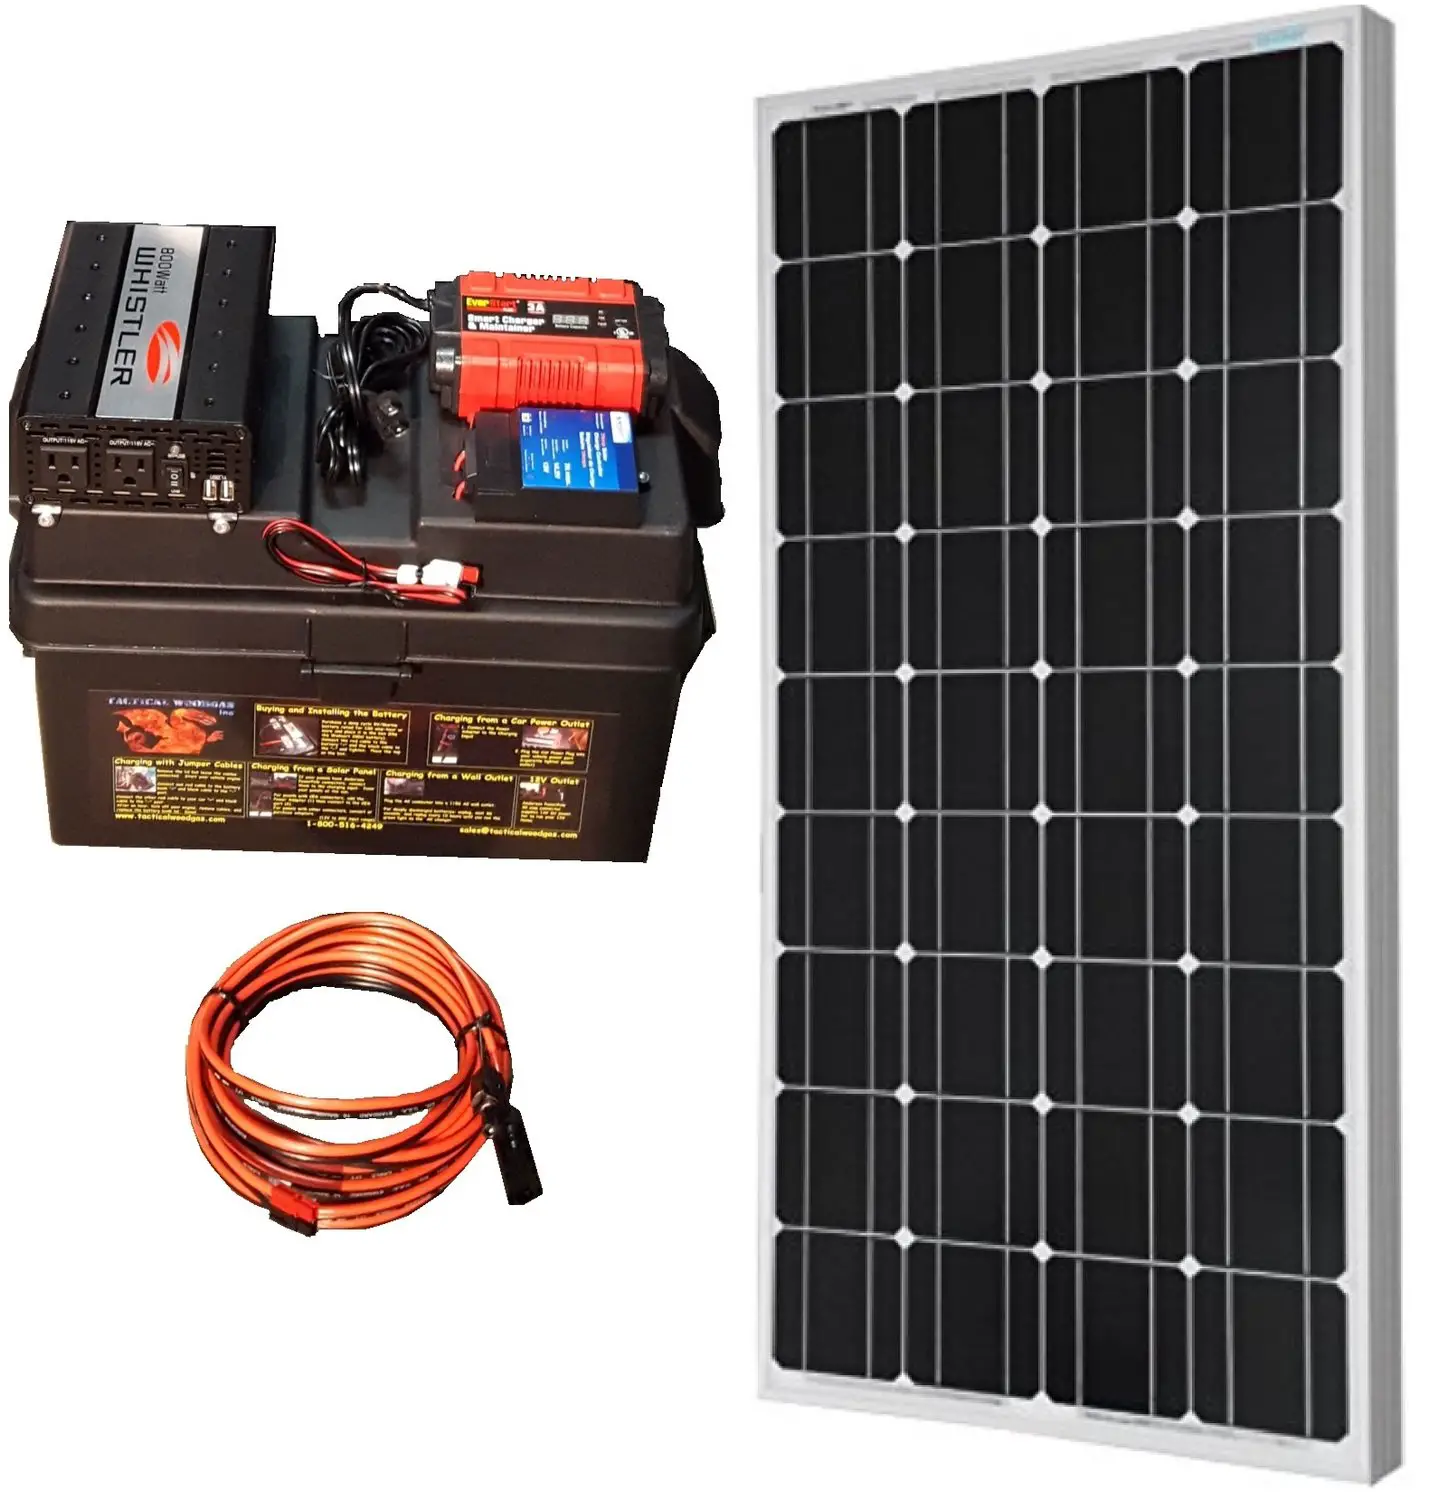 800W Battery Bank PLUS 100W solar panel &  connecting cable